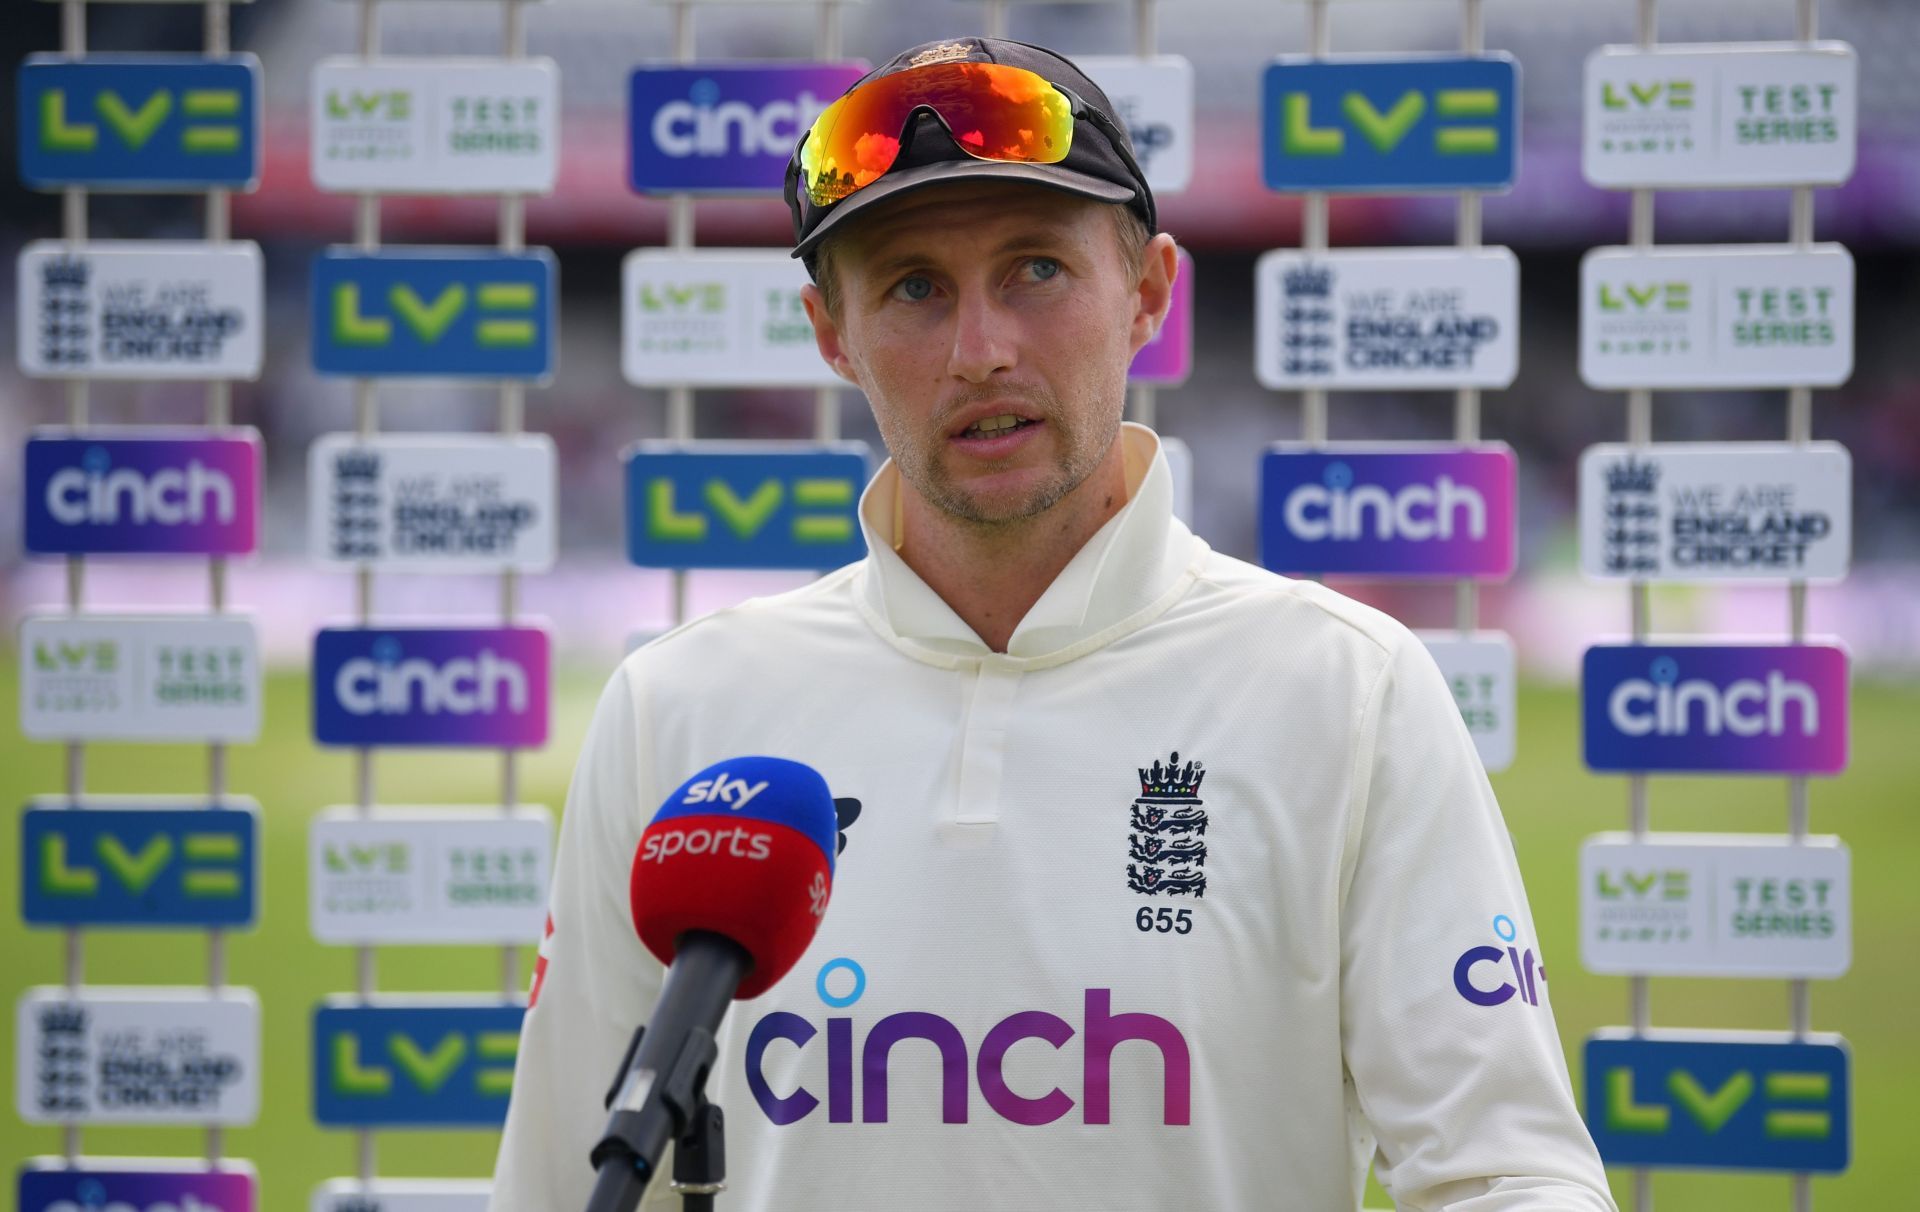 England Test captain Joe Root has opened up on the controversy surrounding racism at his club Yorkshire